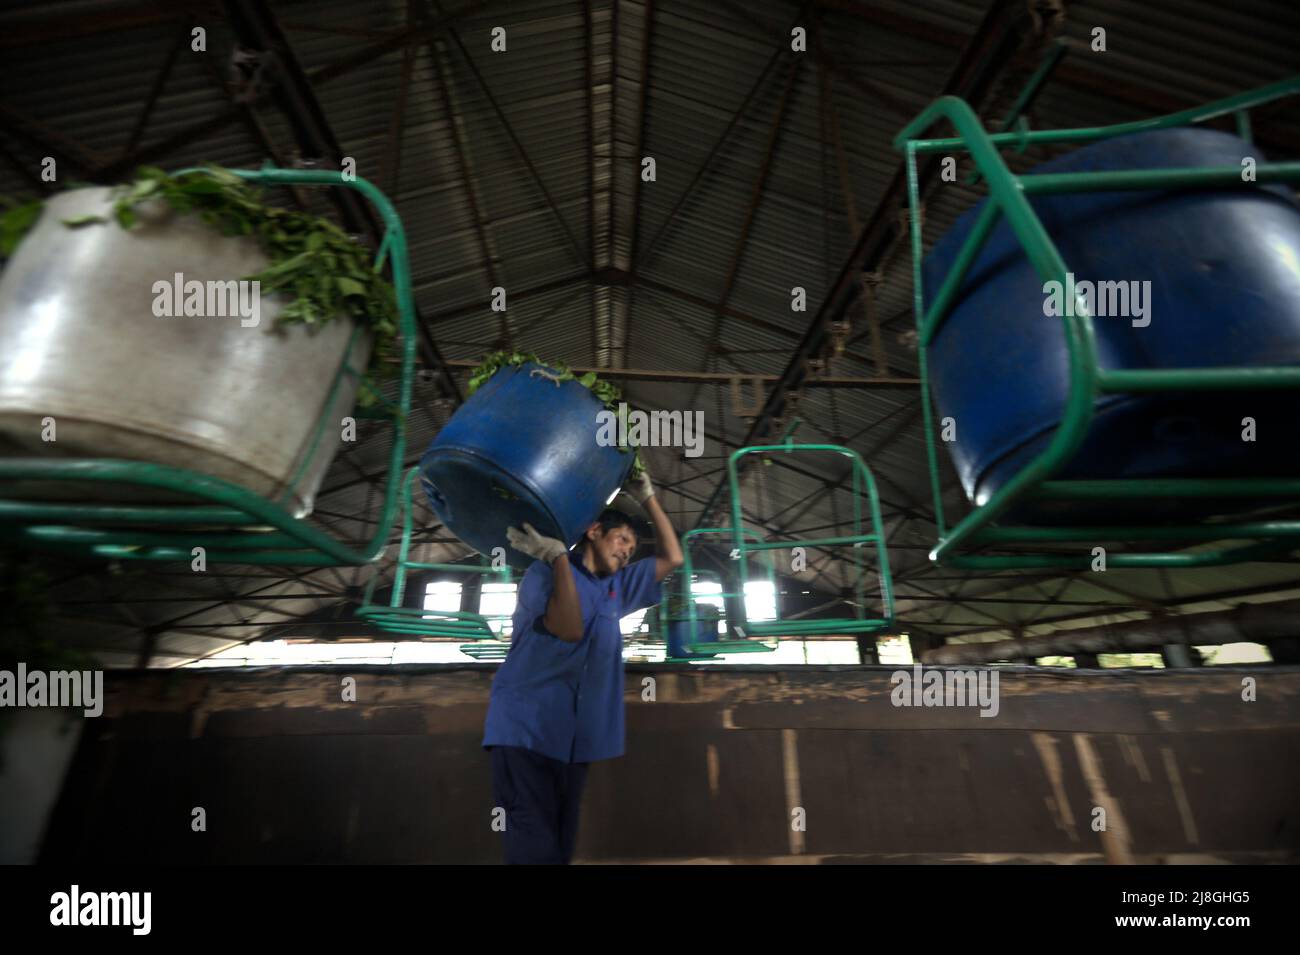 A worker carrying plastic container filled with tea leaves during withering phase at Kayu Aro tea factory in Kersik Tuo village, Kayu Aro, Kerinci, Jambi, Indonesia. Stock Photo